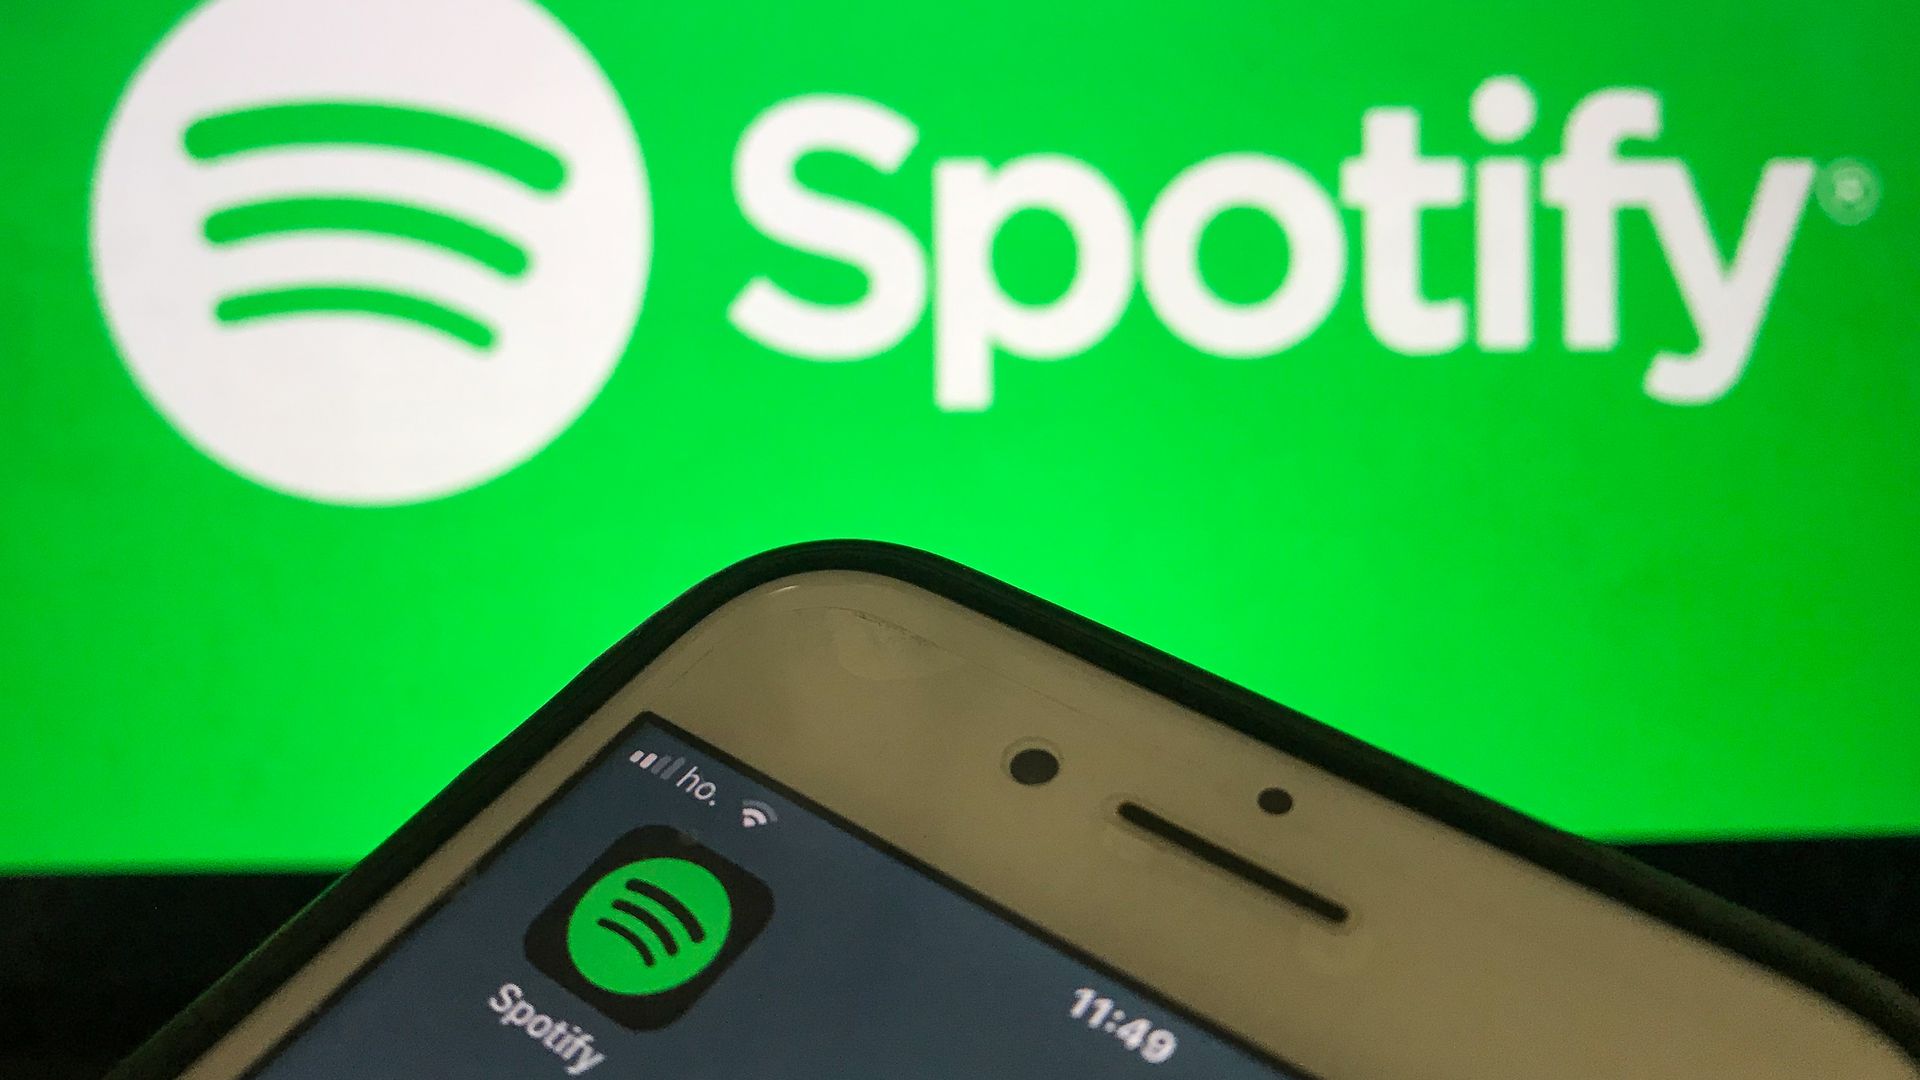 A photo illustration of an iPhone with the Spotify app set against a backdrop of the Spotify logo.